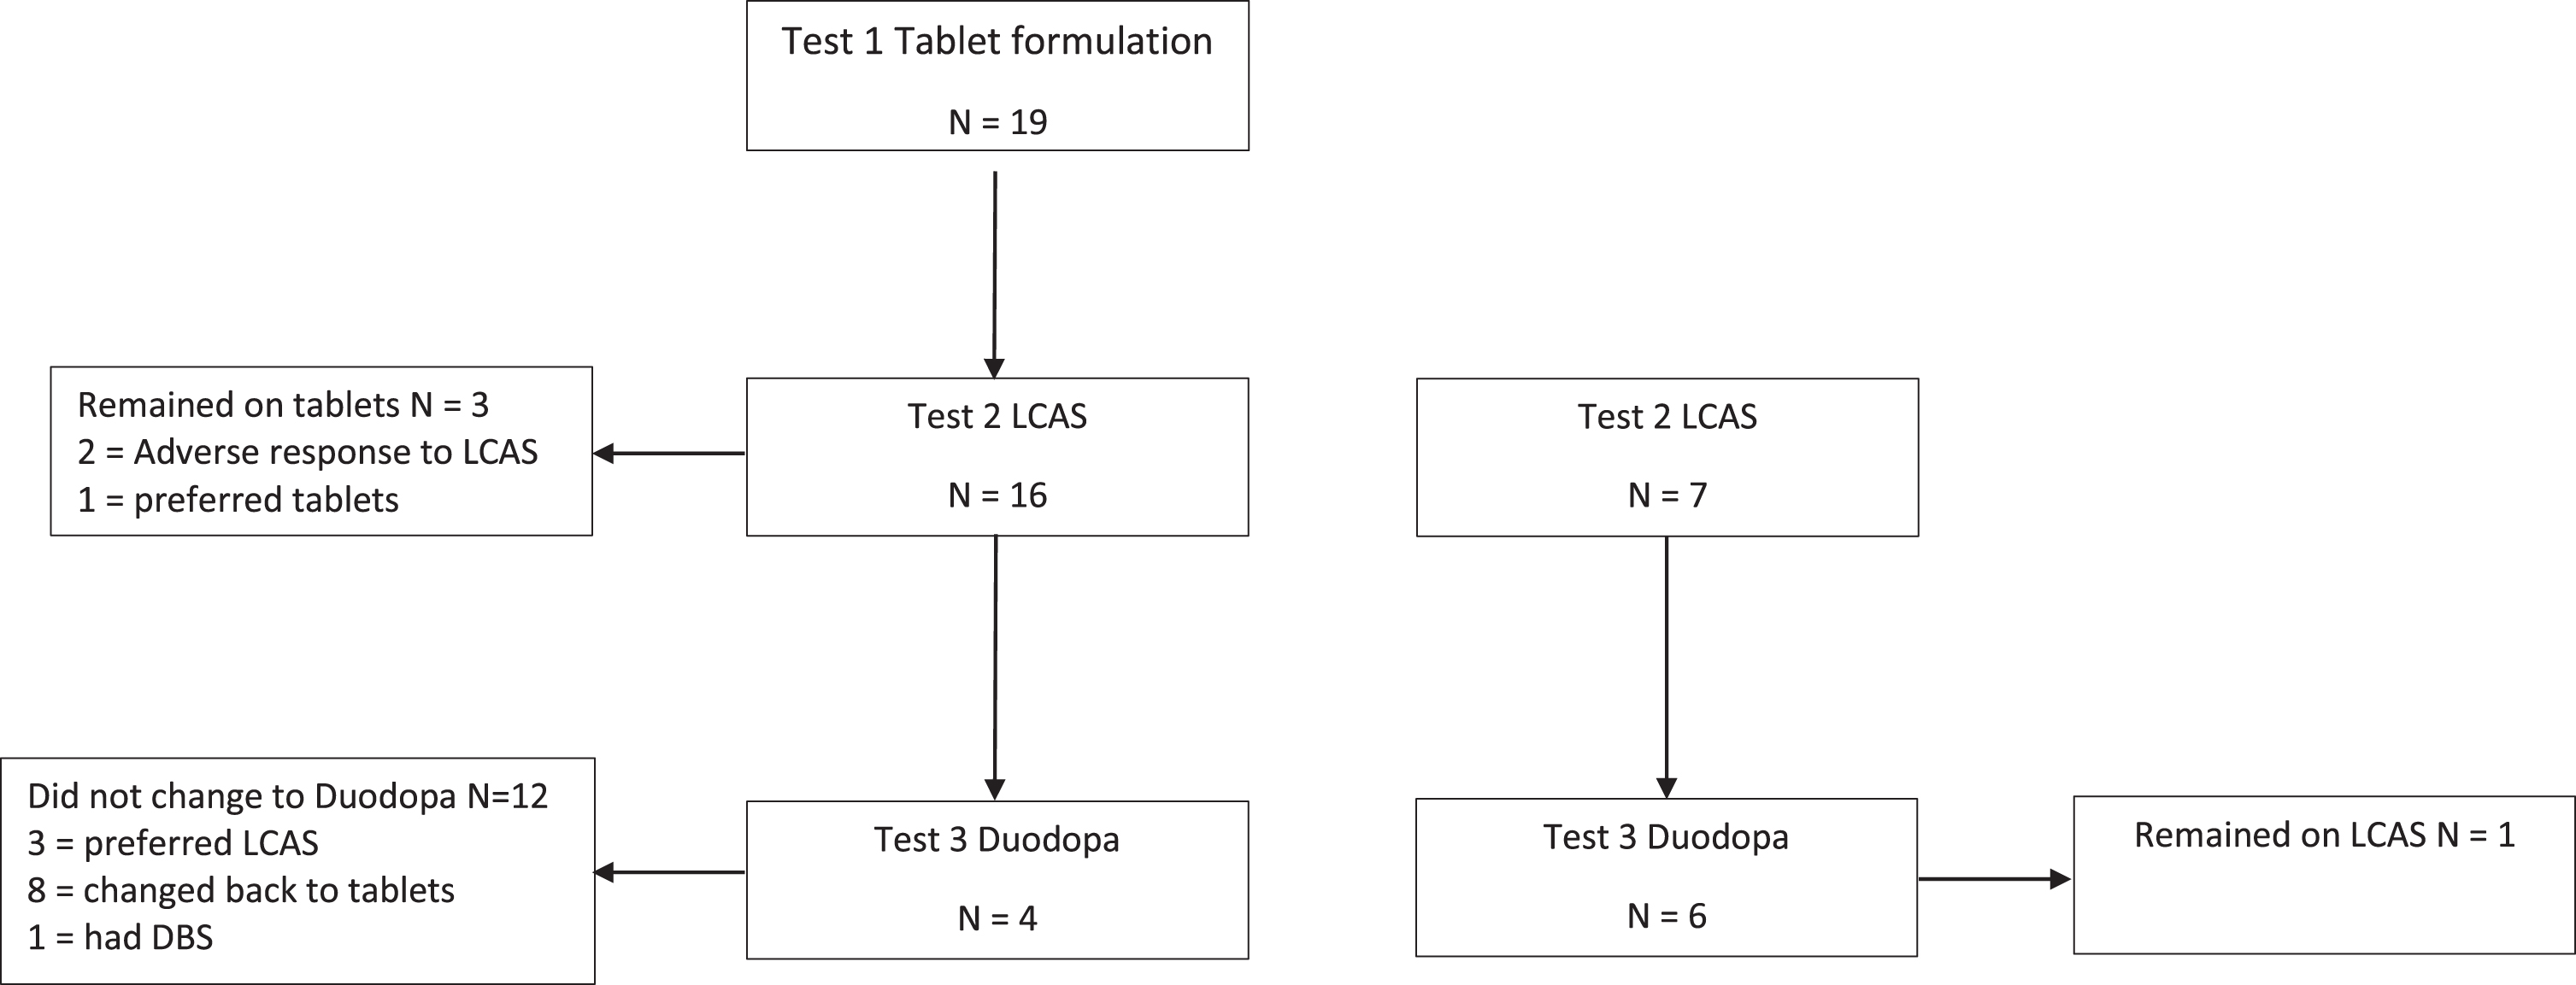 Flow of 26 patients in the LCAS study.